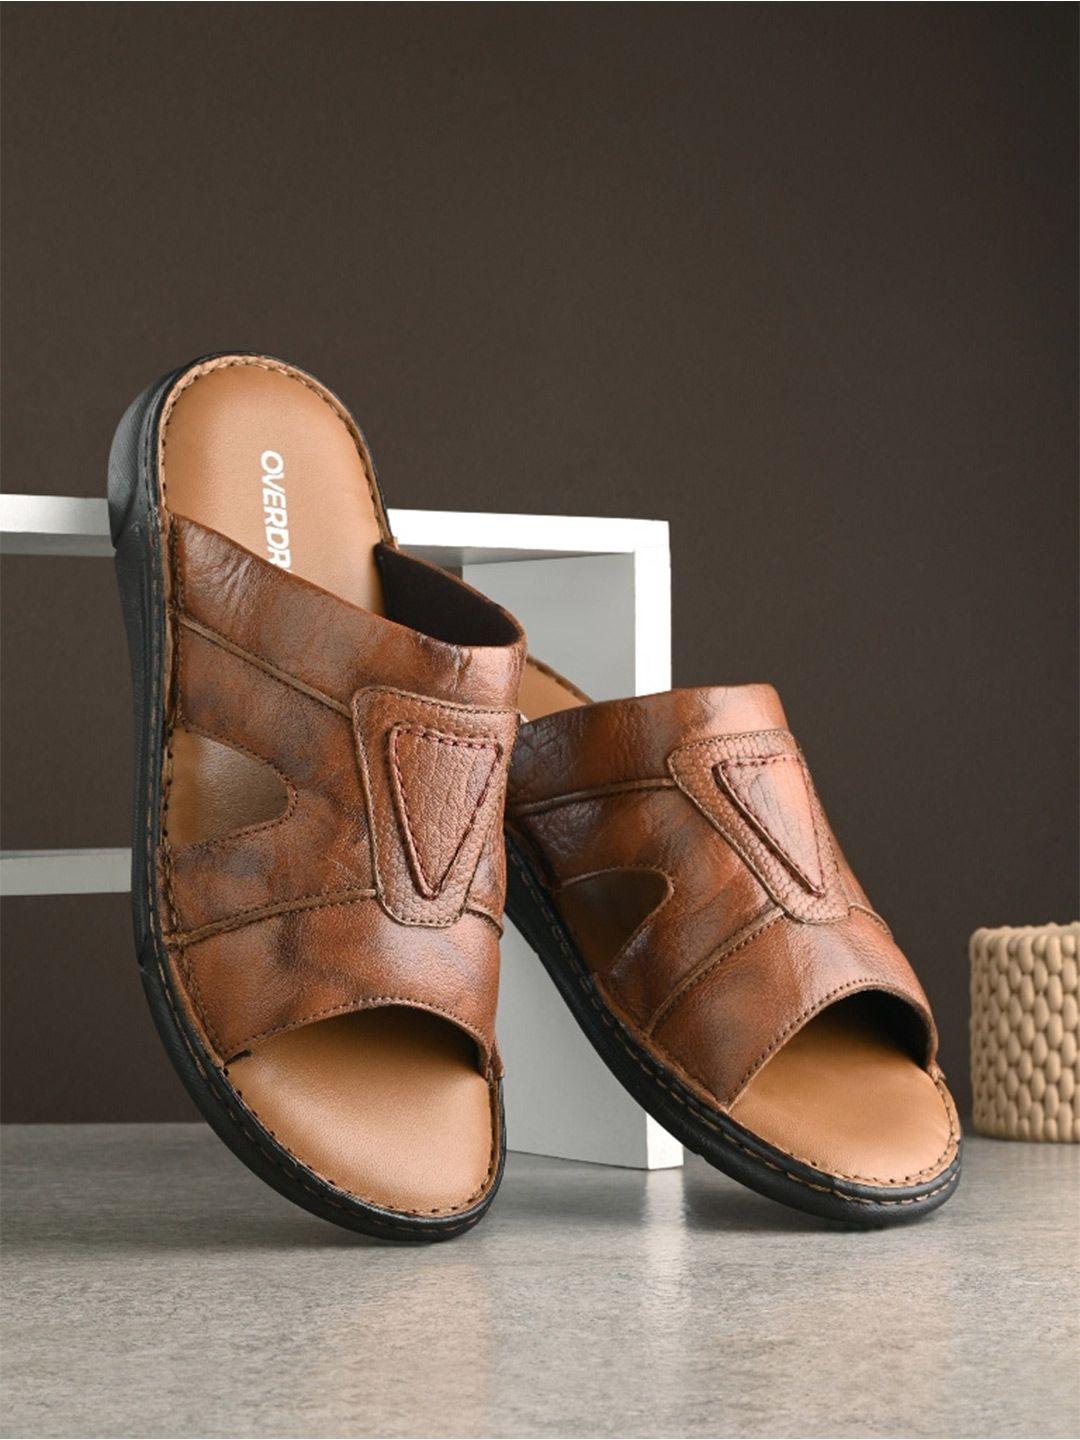 overdrive textured leather comfort sandals